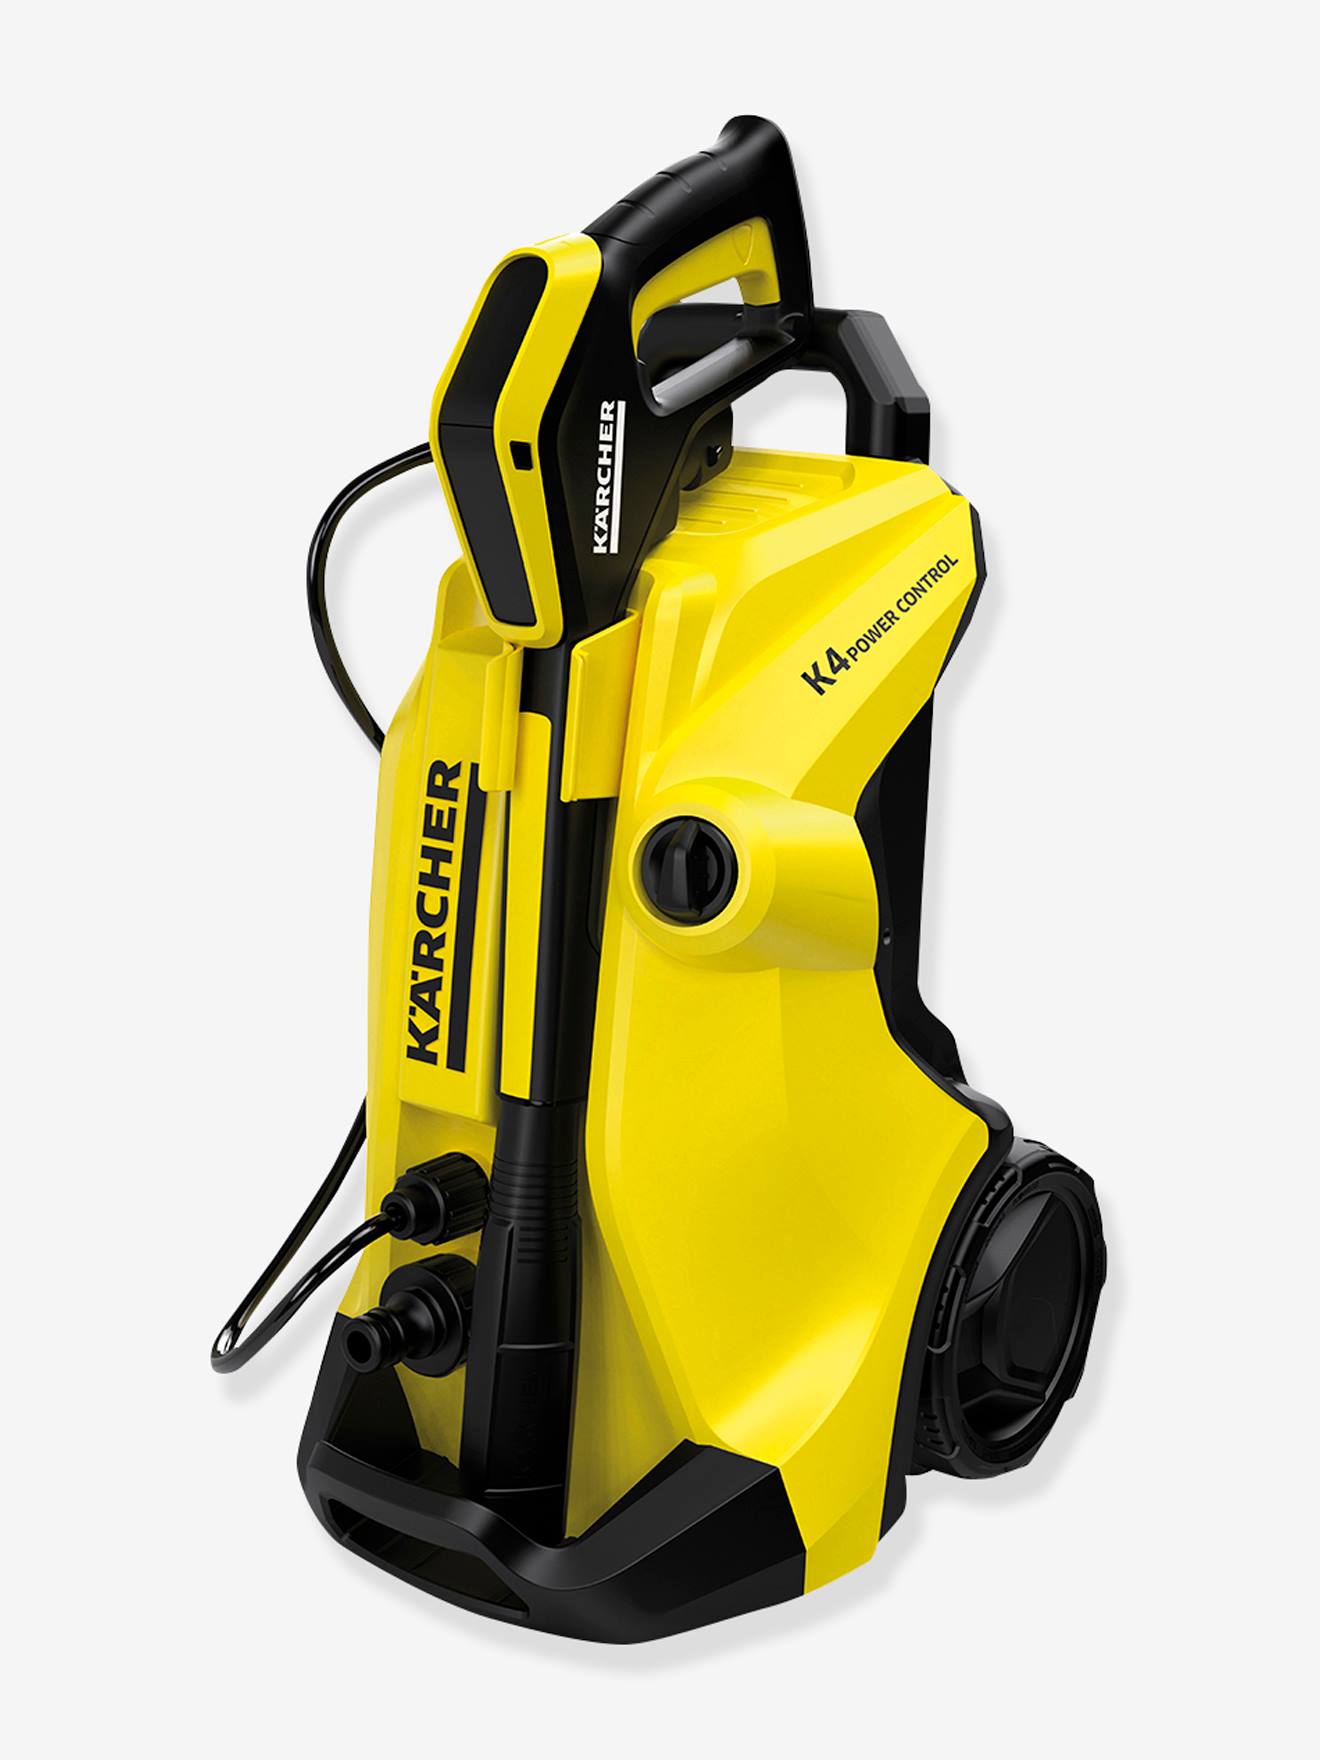 Karcher K4 Pressure Washer - SMOBY - yellow, Toys